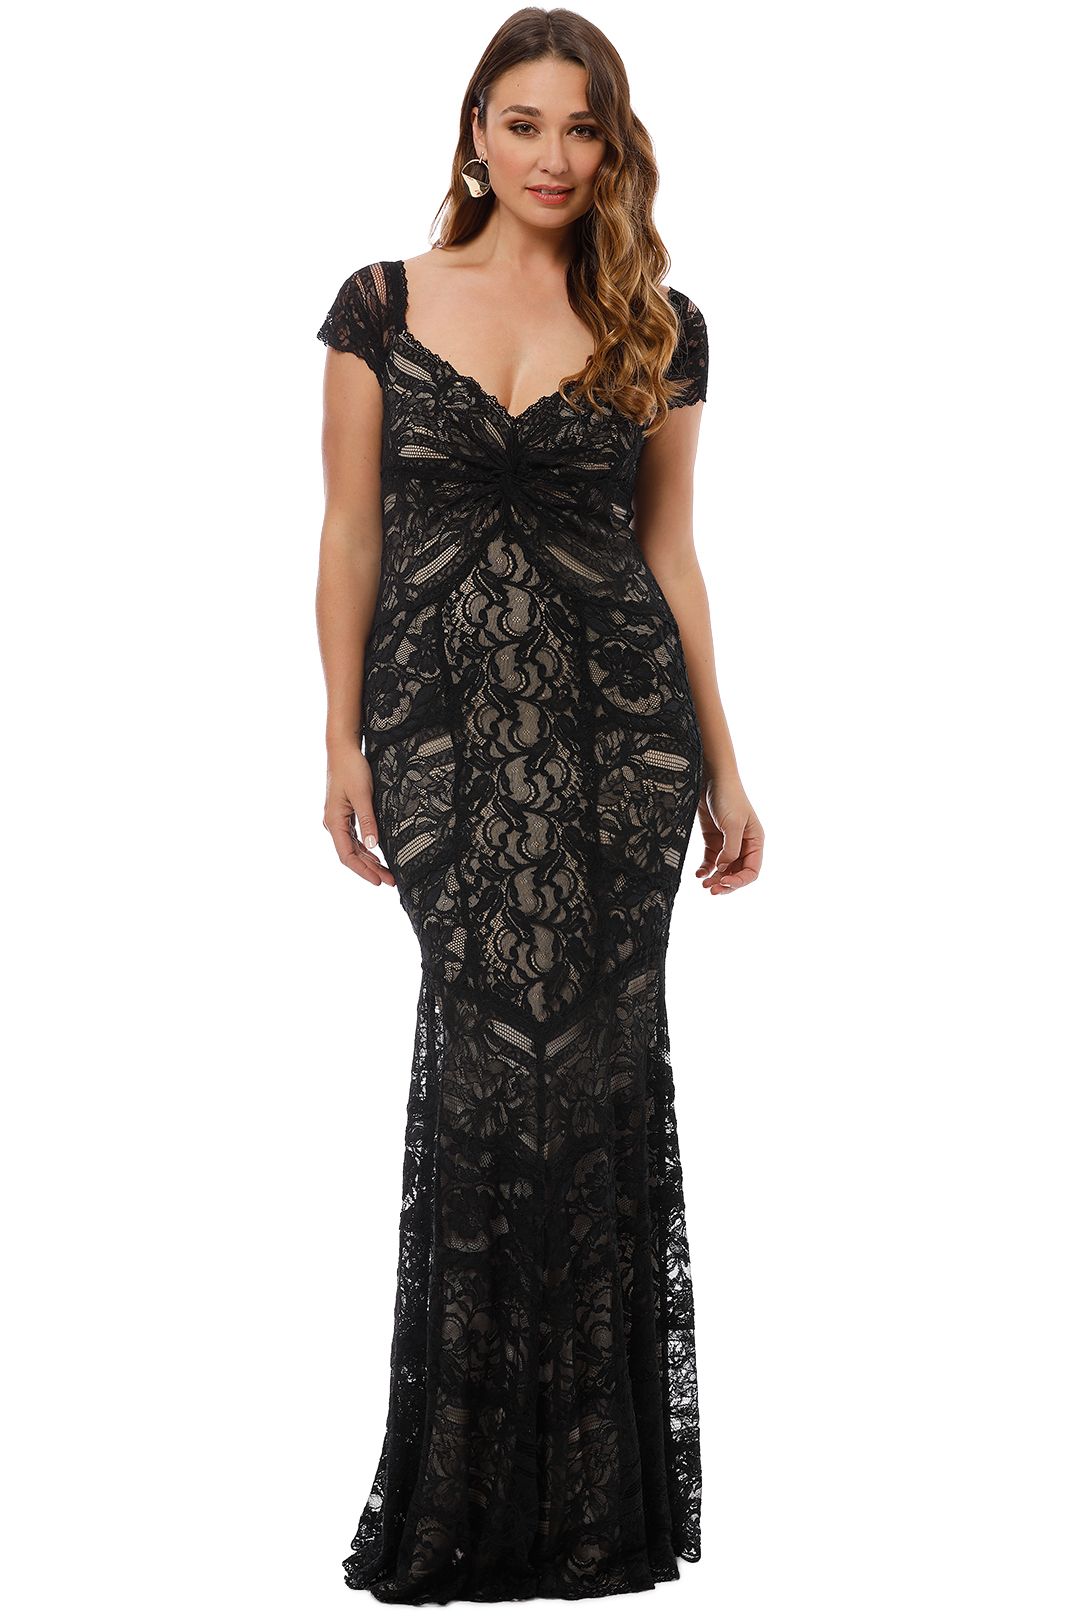 Nicole Miller - Loren Stretch Lace Gown - Black Nude - Front